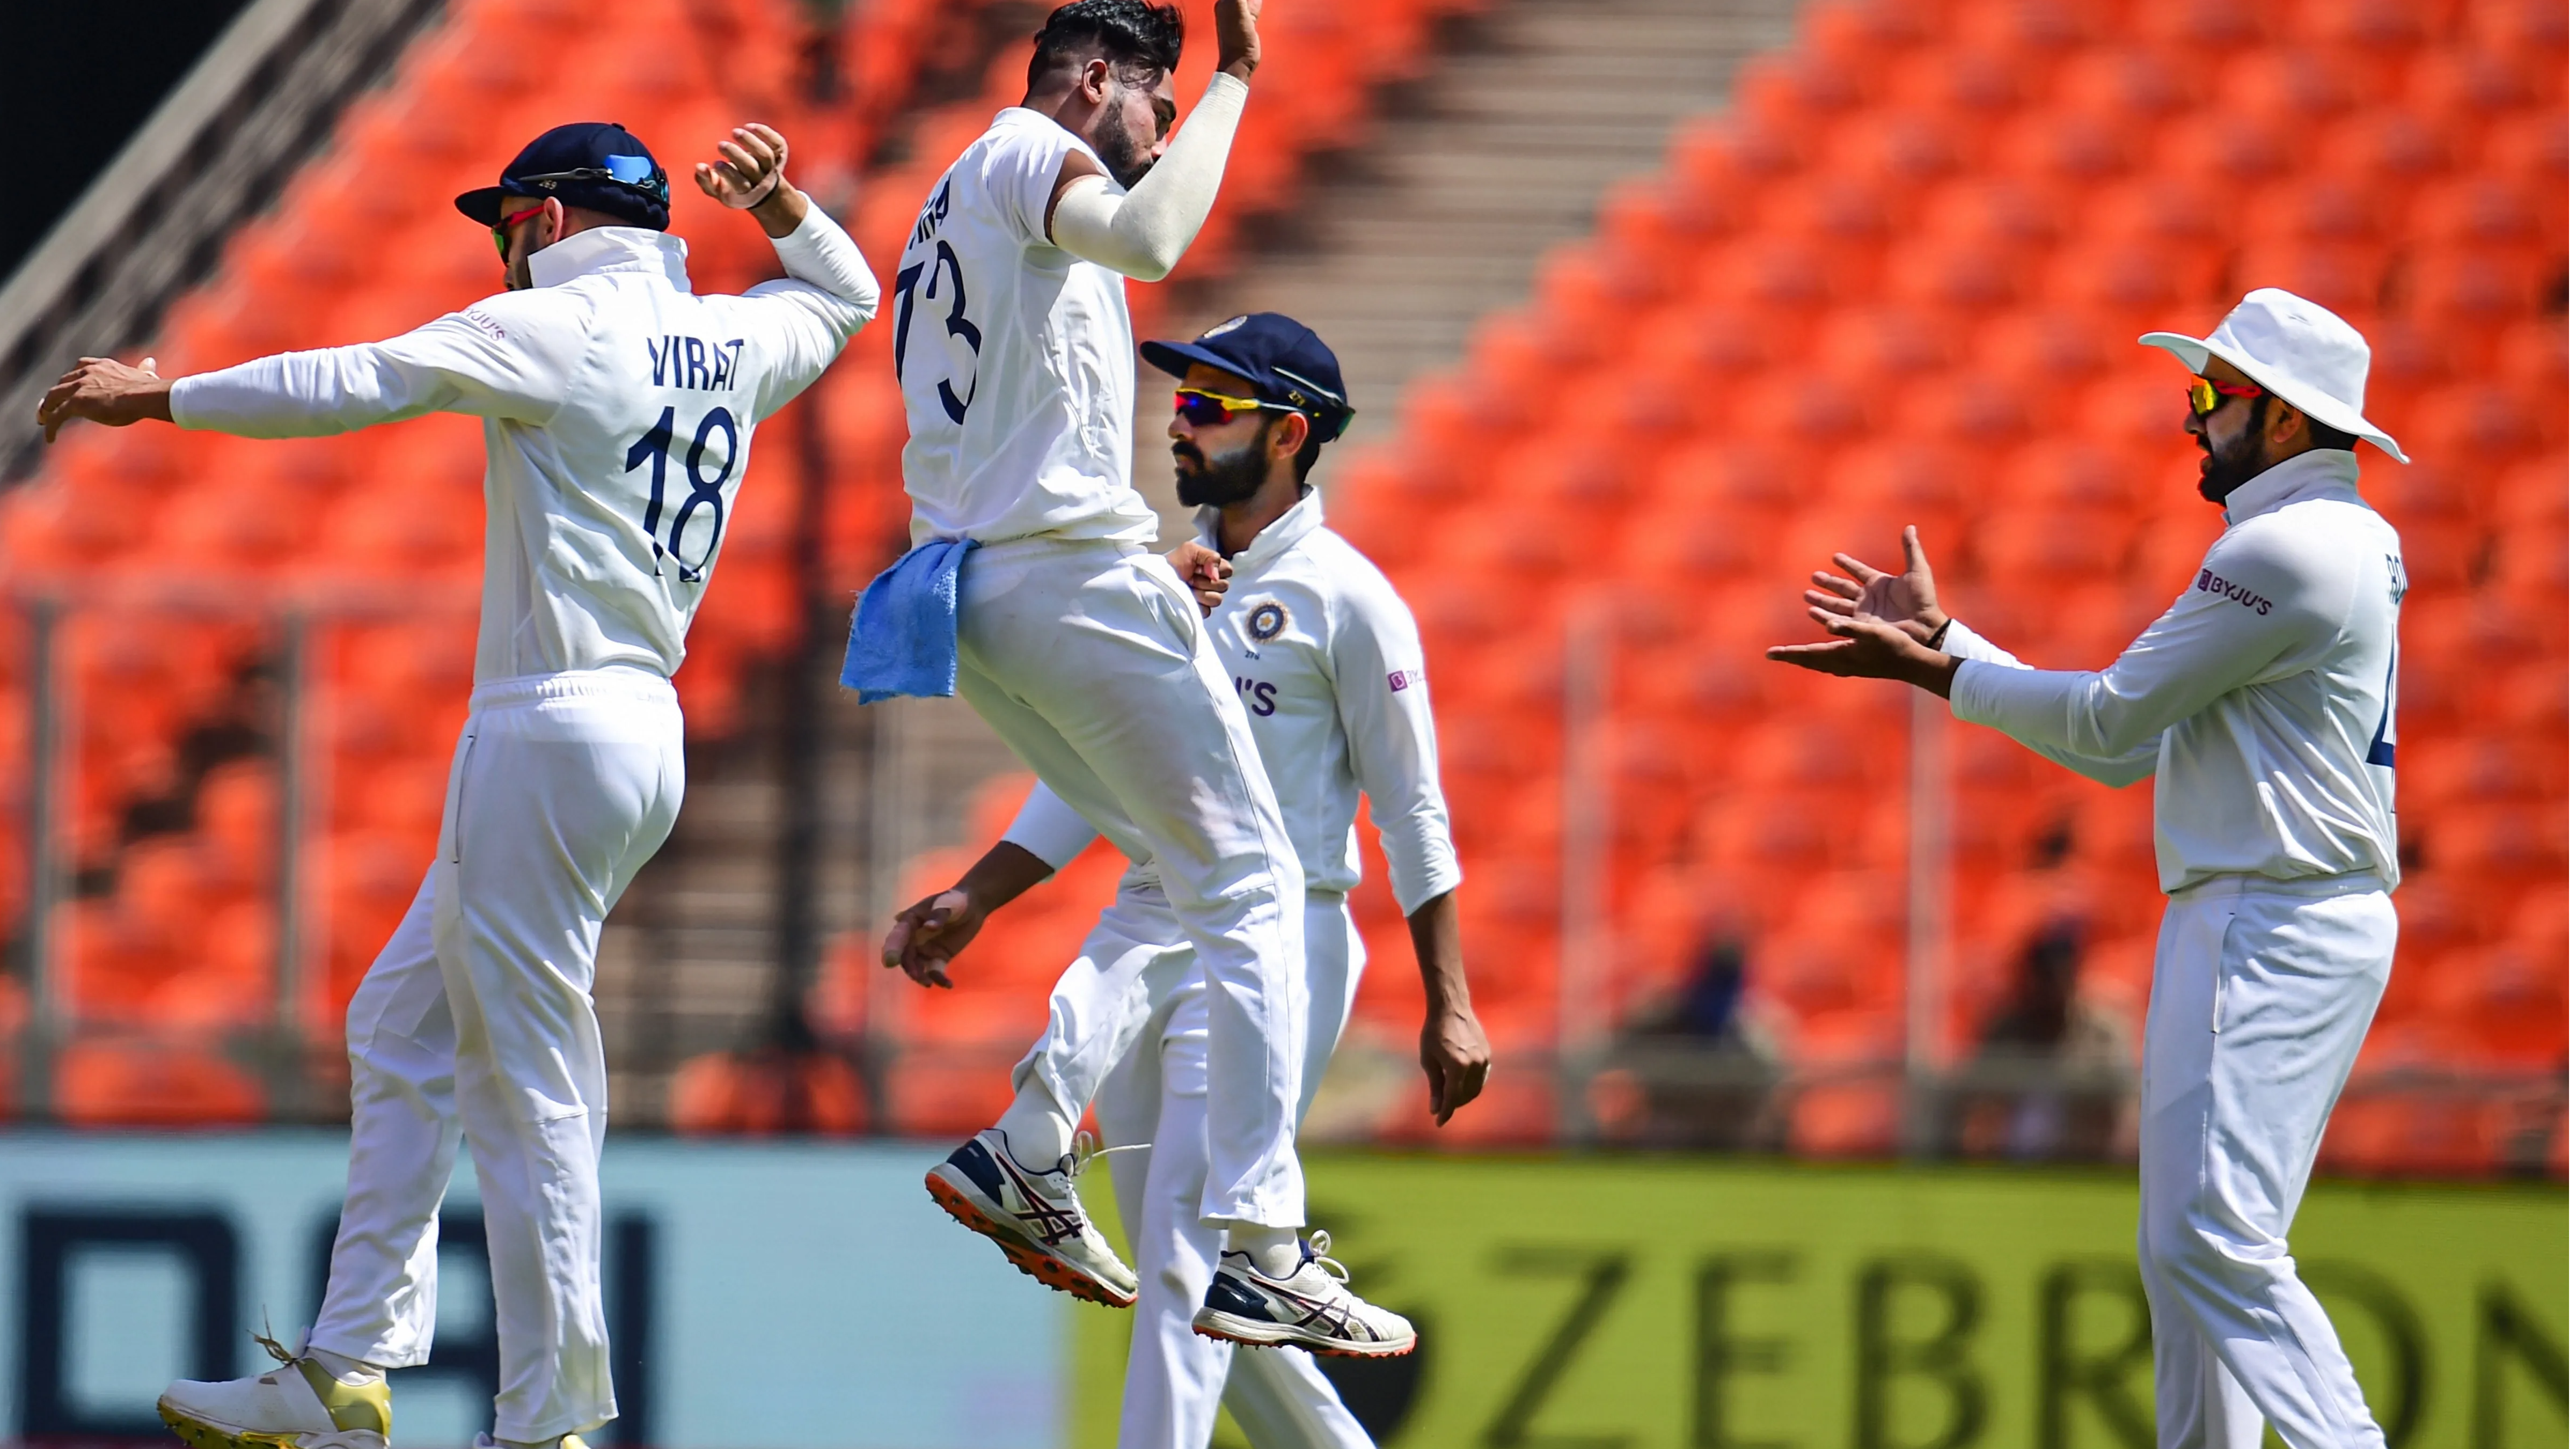 4th Test: India finish Day 1 at 24/1, trail England by 181 runs